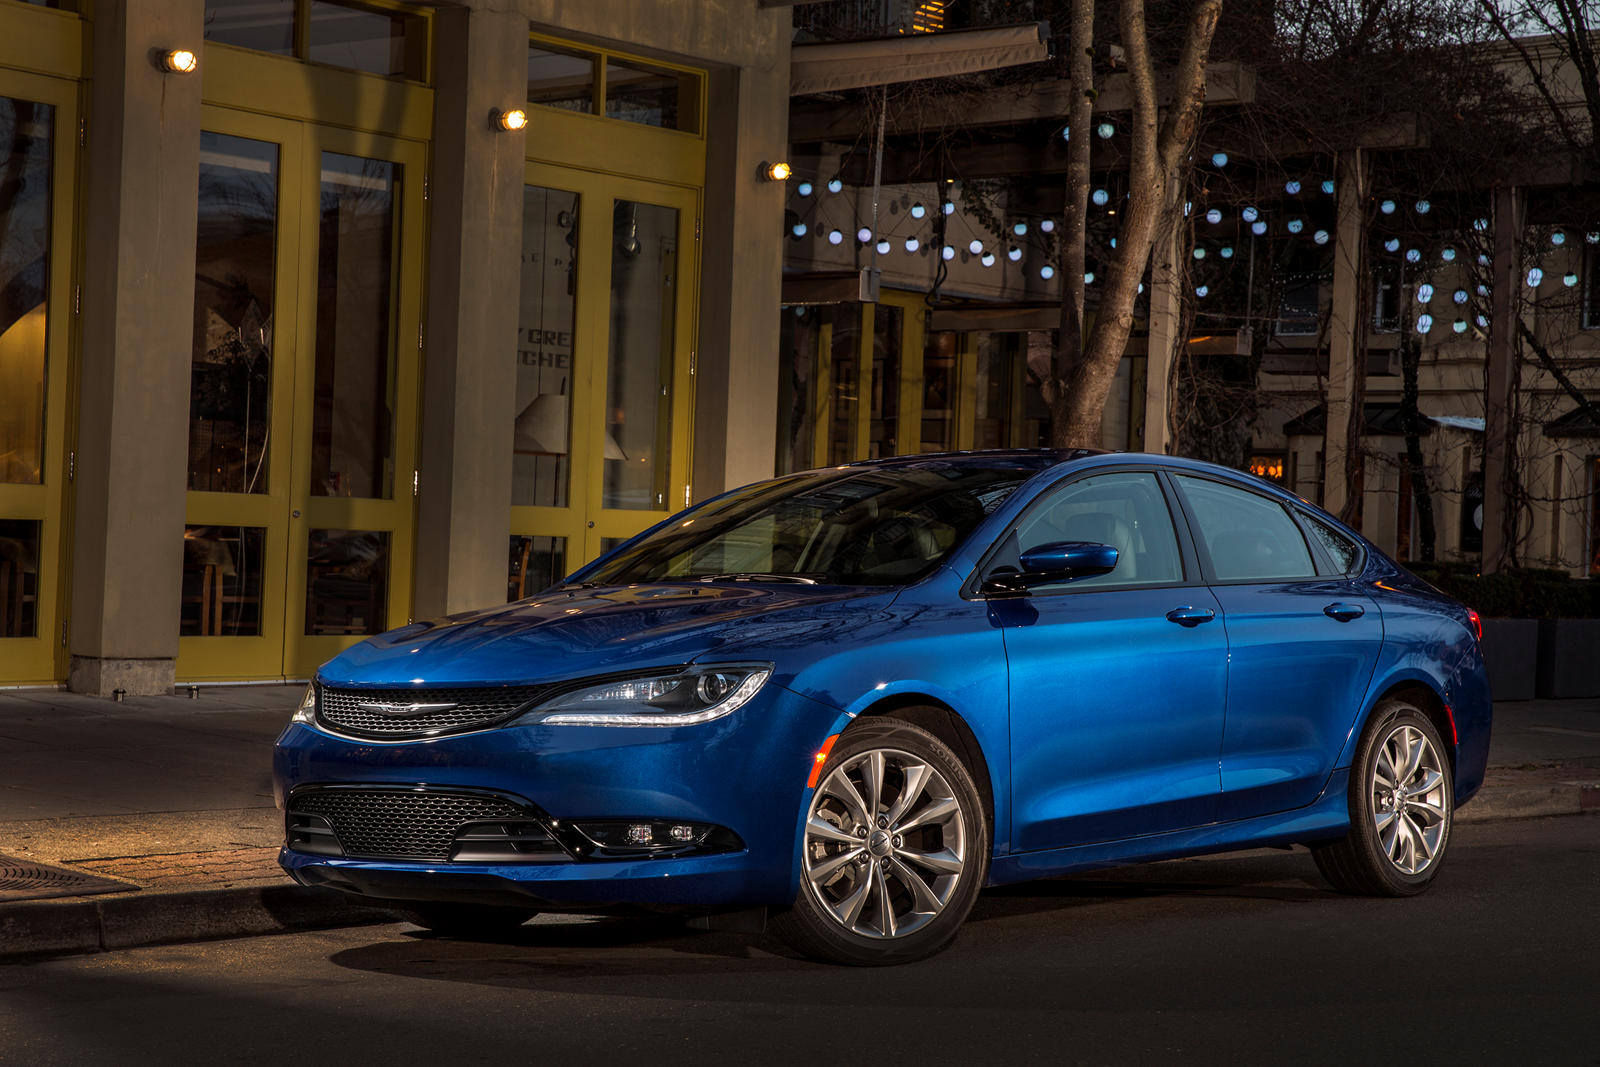 2015 Chrysler 200 Sedan: Review, Trims, Specs, Price, New Interior  Features, Exterior Design, and Specifications | CarBuzz